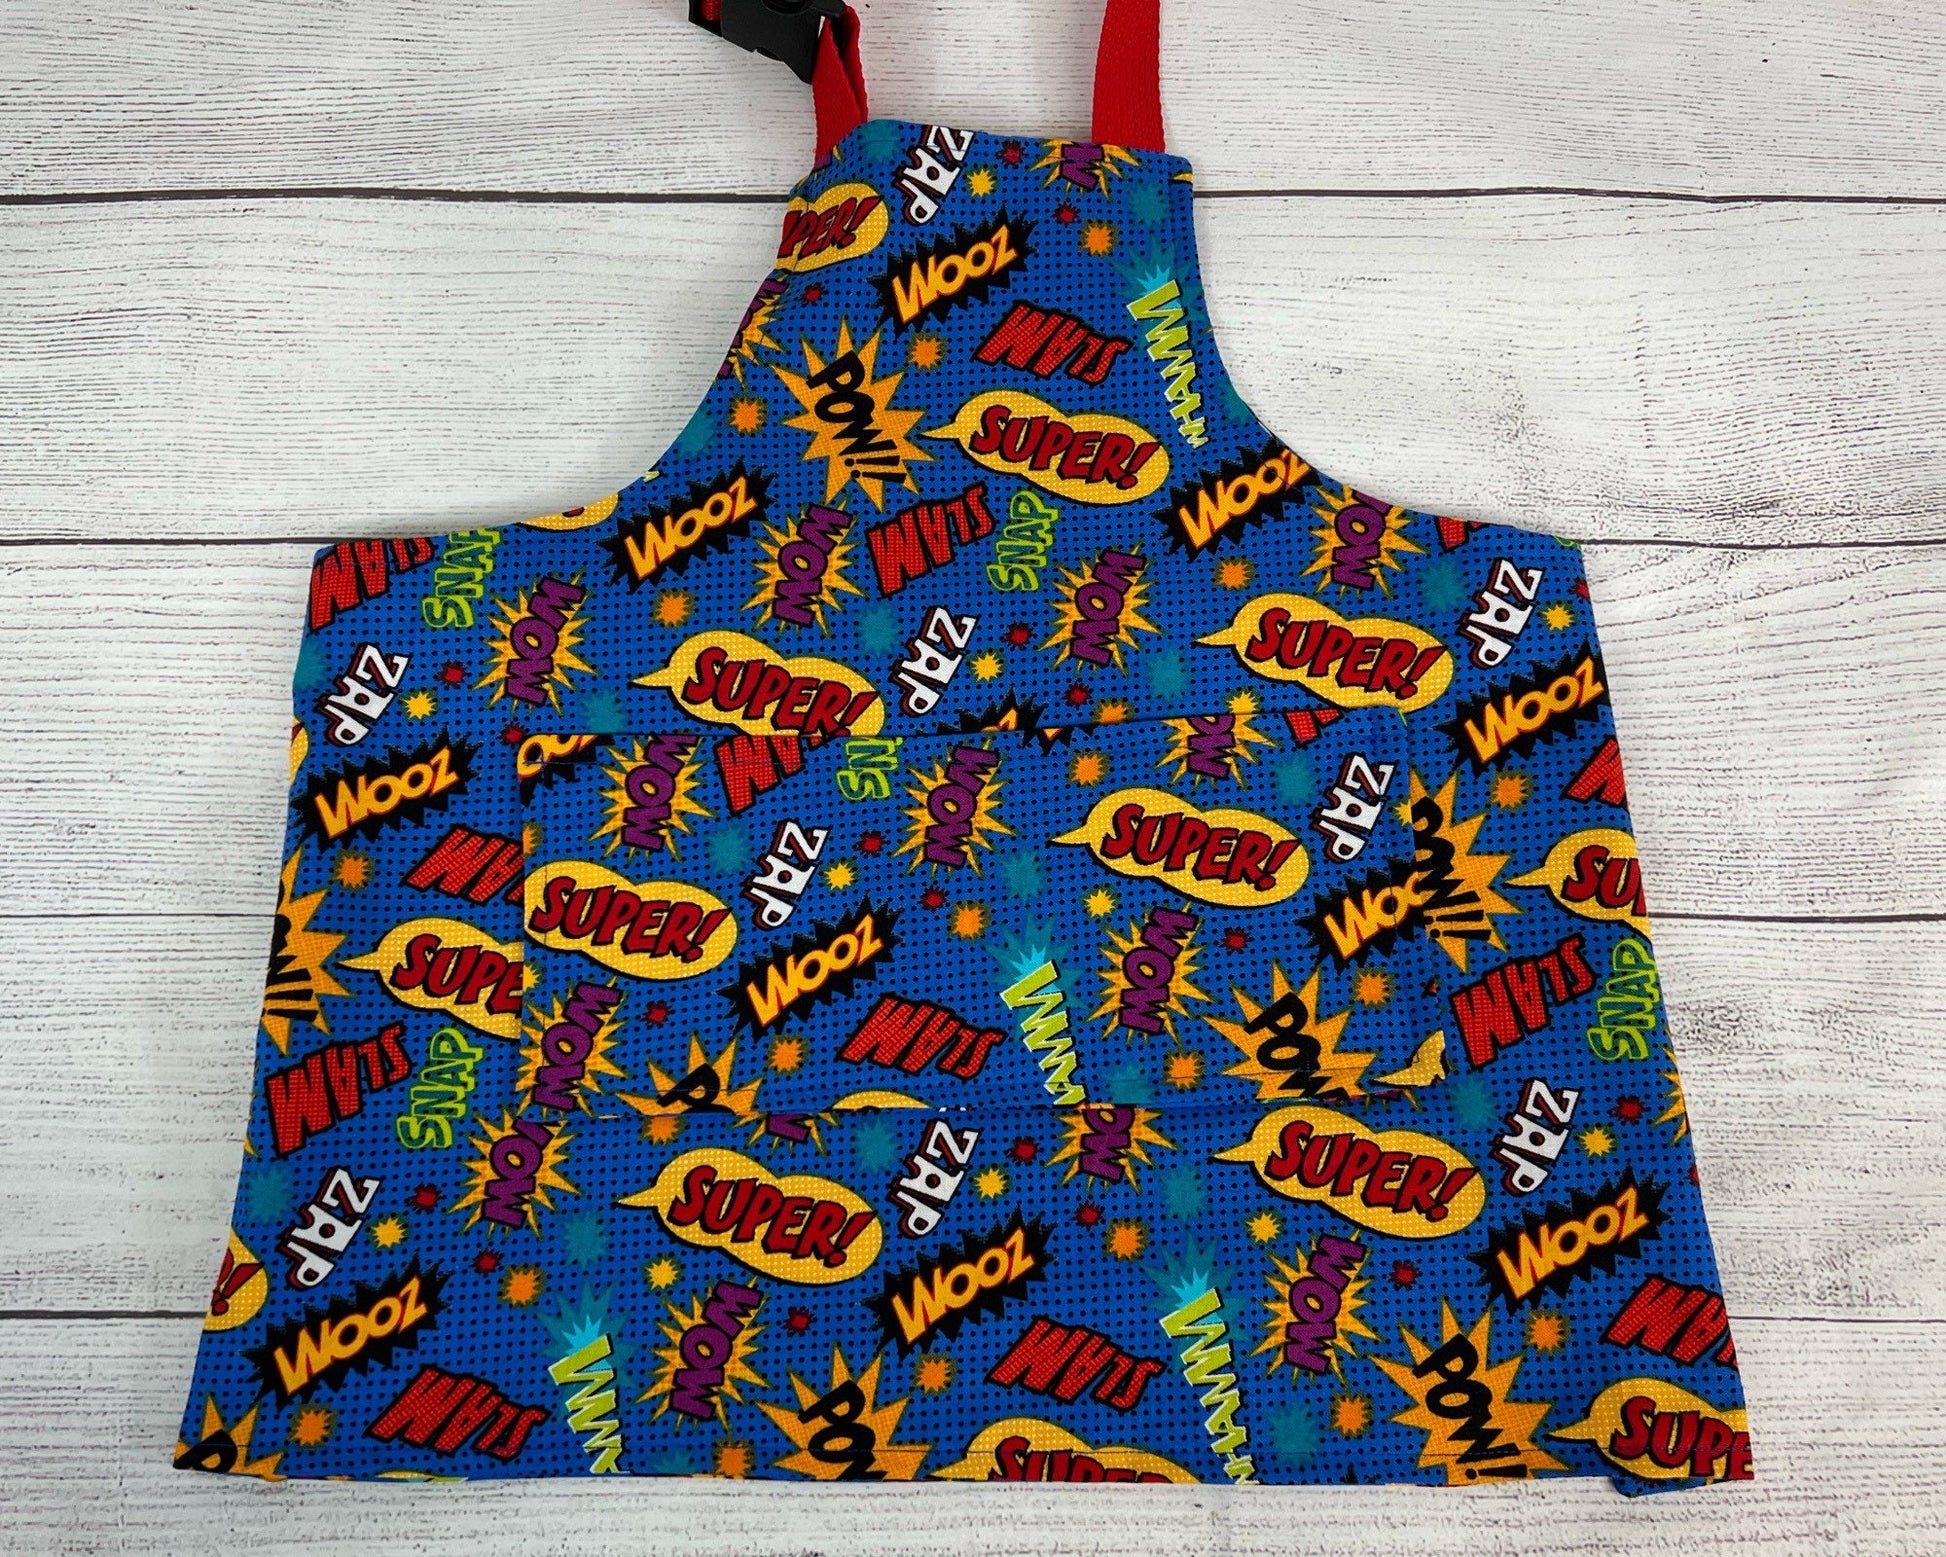 Toddler Apron - Kitchen - Cooking - Early Cooking Skills - Toddler Messes - Toddler Accessories - Super Hero - Heroes - Pow - Small Apron